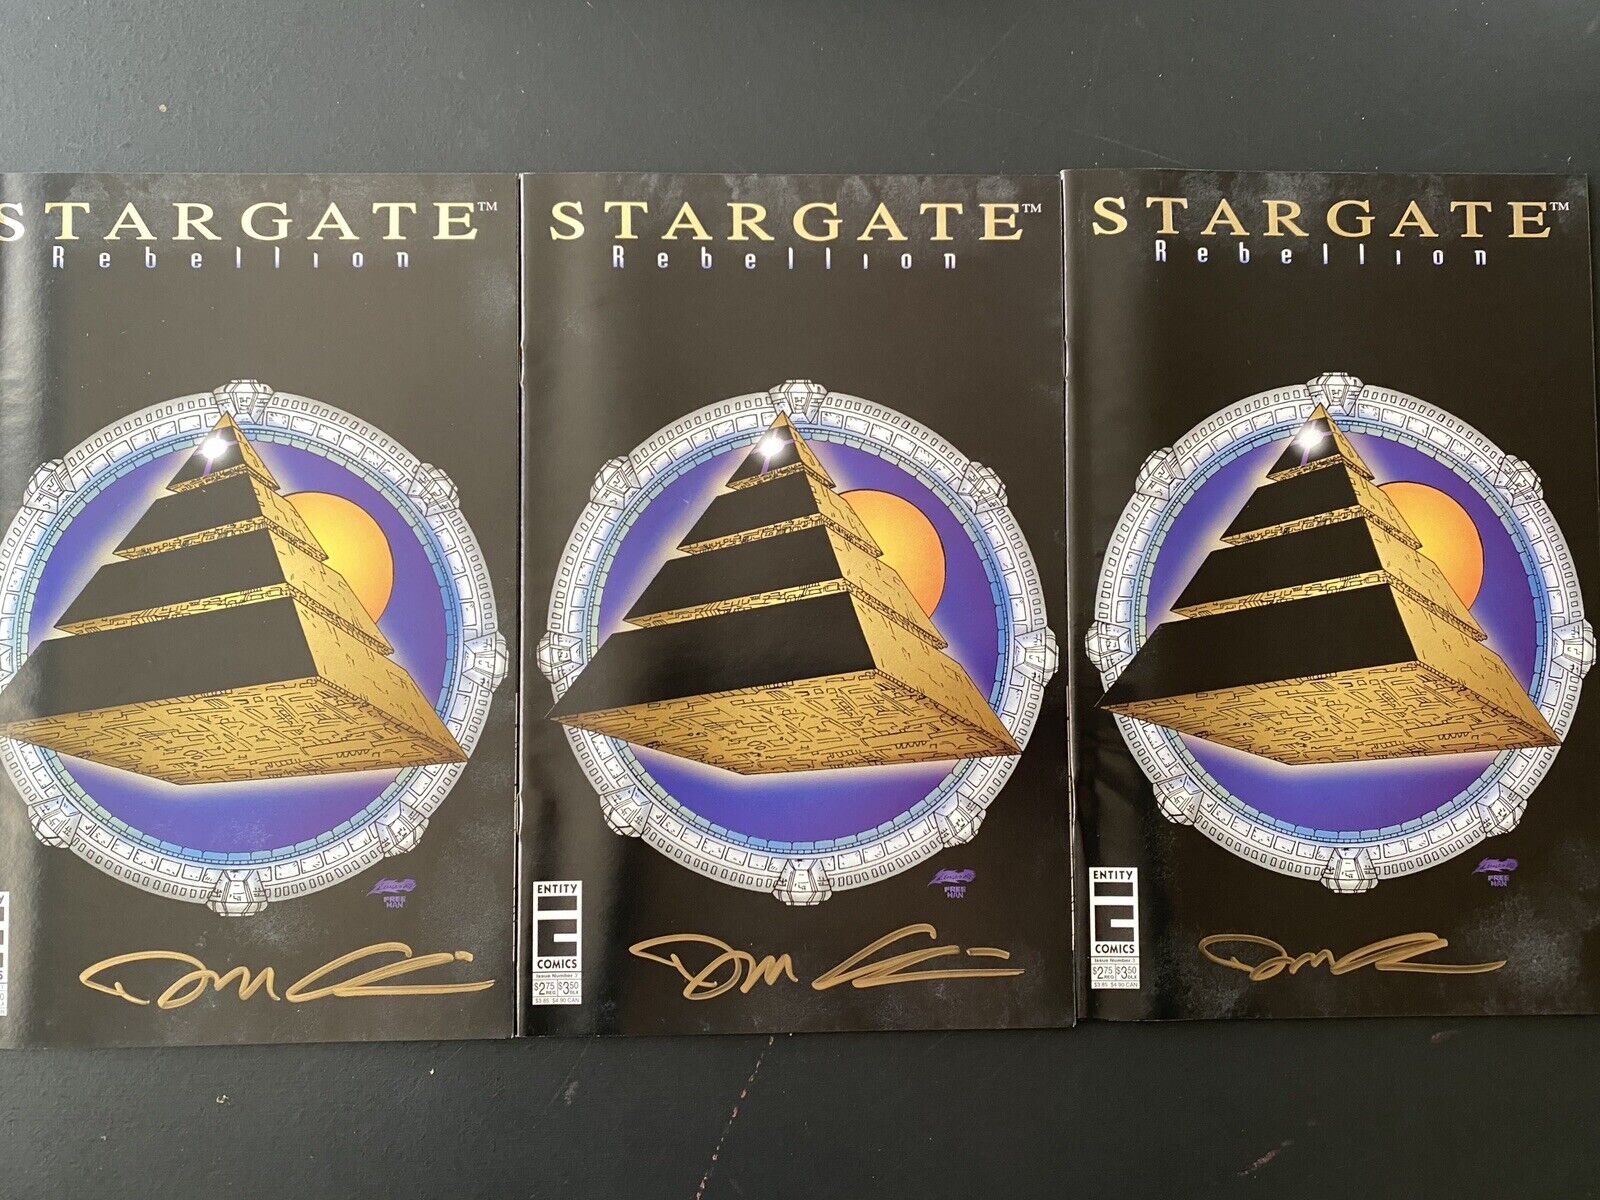 STARGATE REBELLION #3 COMIC BOOKS,AUTOGRAPHED BY DON CHIN LOT OF 3, VG CONDITION